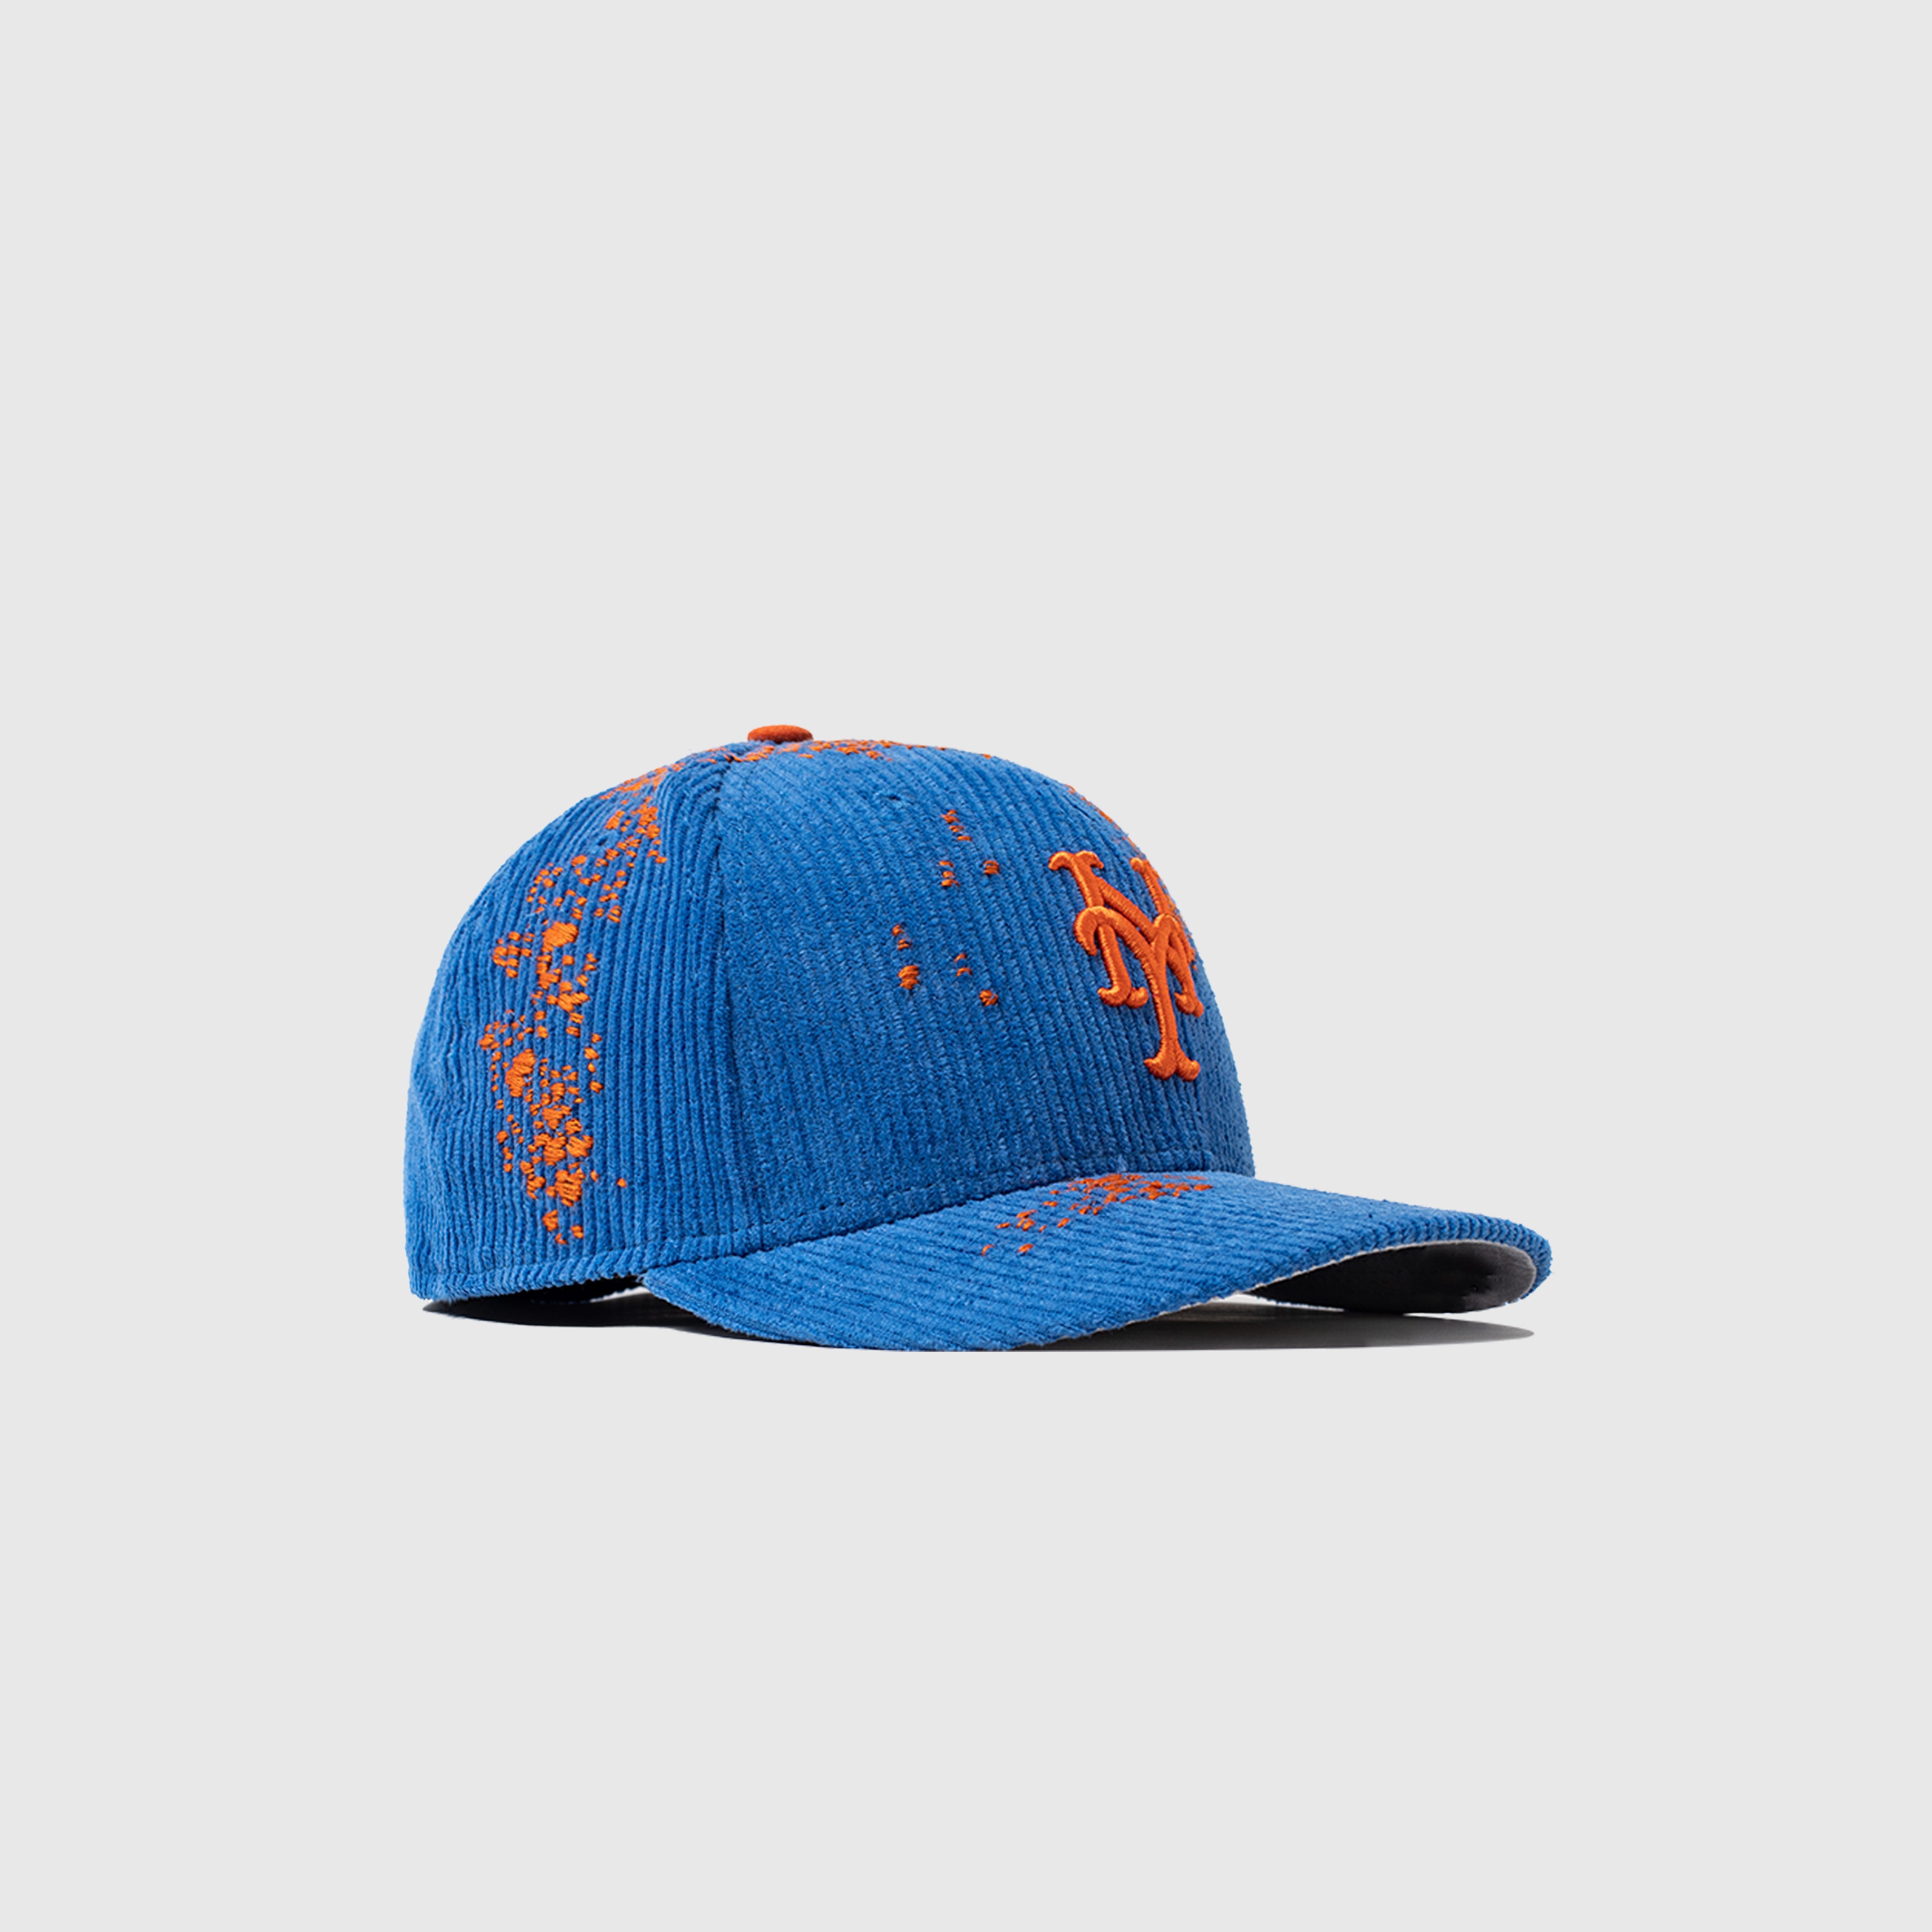 AnthonyantonellisShops X BANDULU NEW YORK METS 59FIFTY FITTED